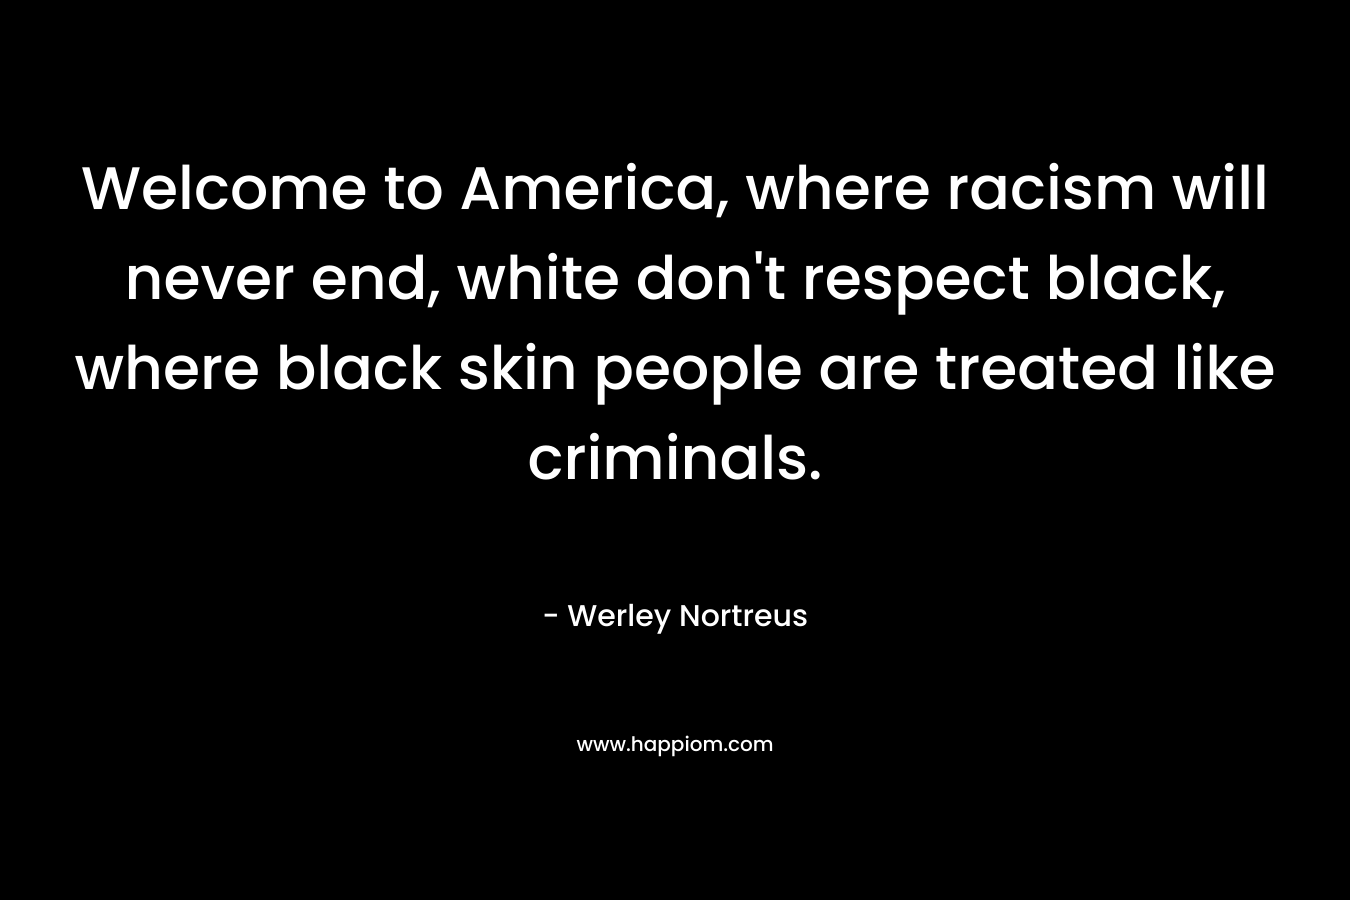 Welcome to America, where racism will never end, white don’t respect black, where black skin people are treated like criminals. – Werley Nortreus